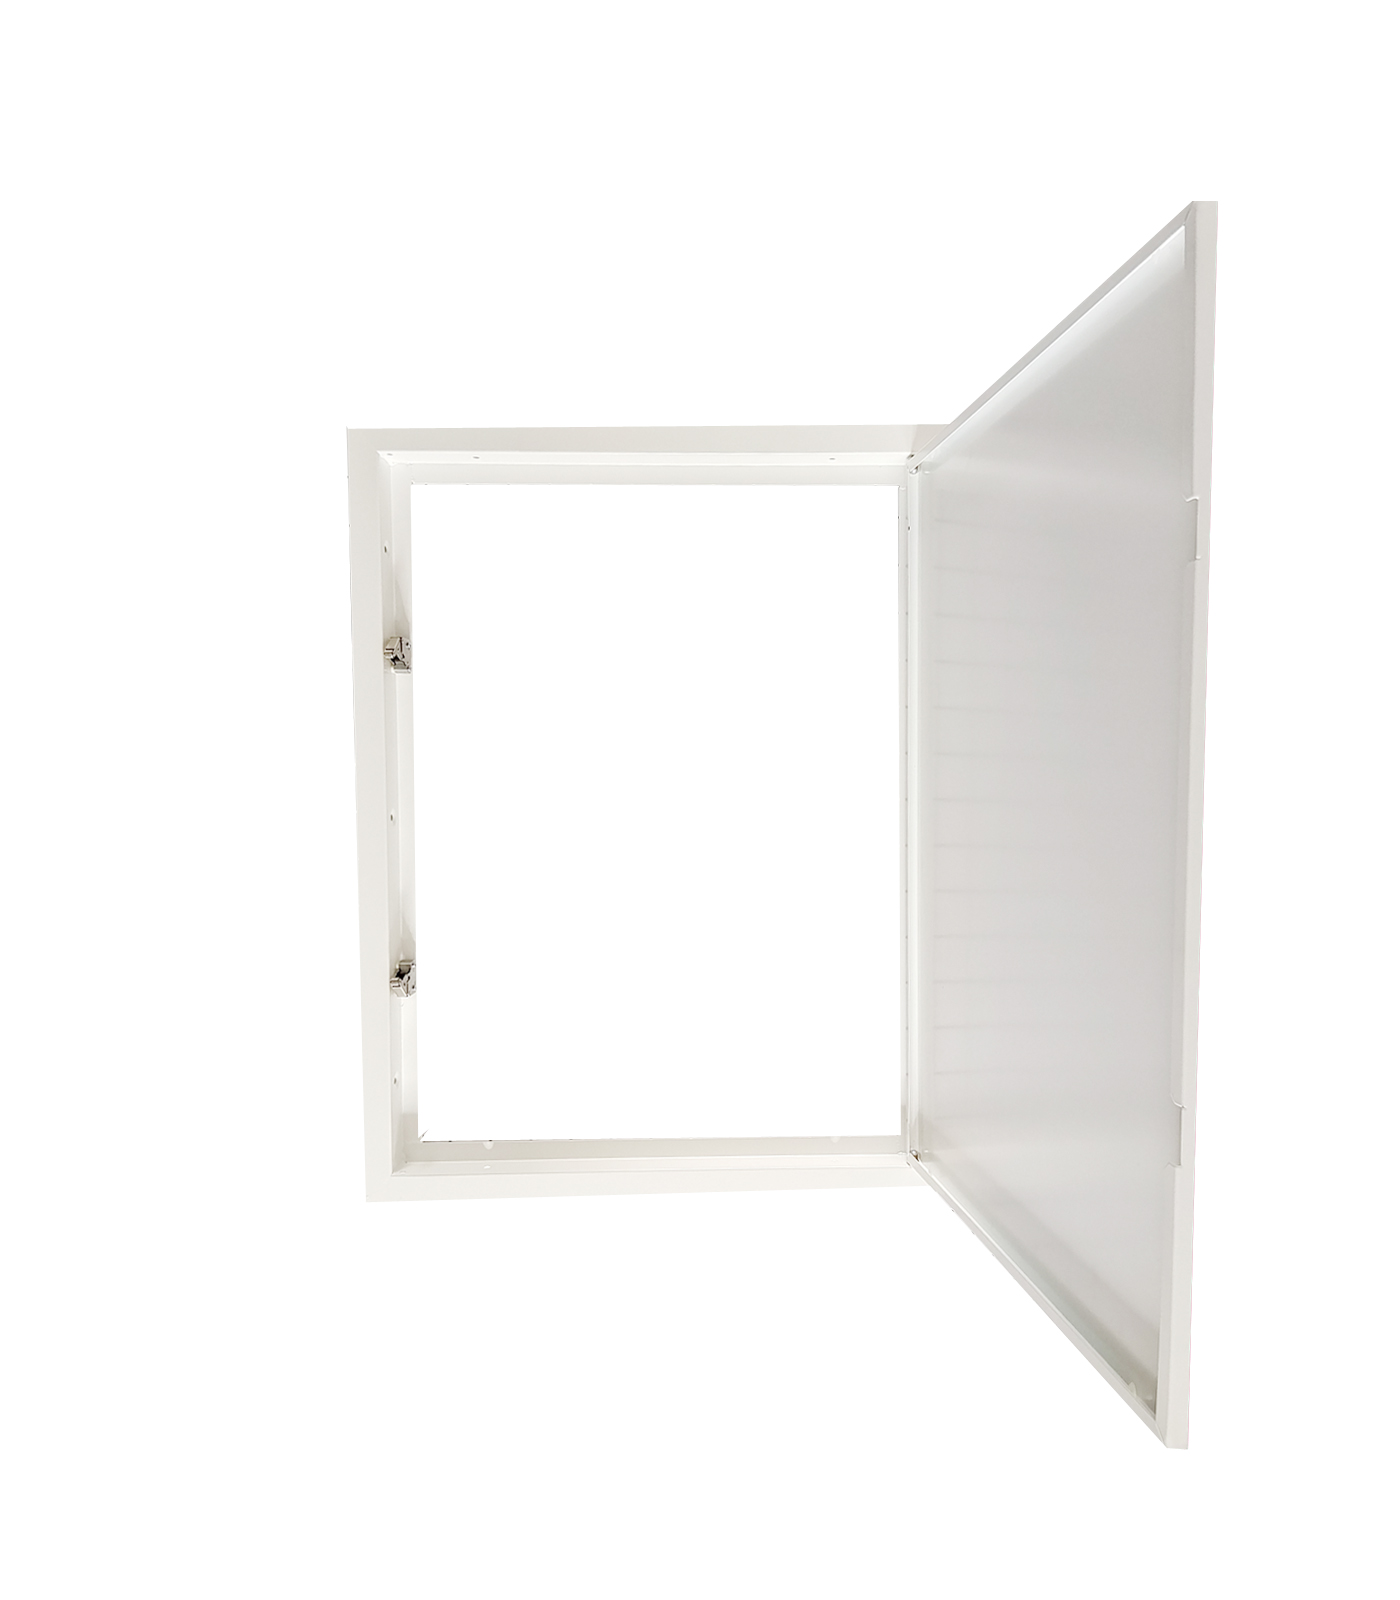 Fengze Metal Spring Loaded Access Panel -18 x 24 Inch Strong Steel Sheet with Touch Latch No Key Needed